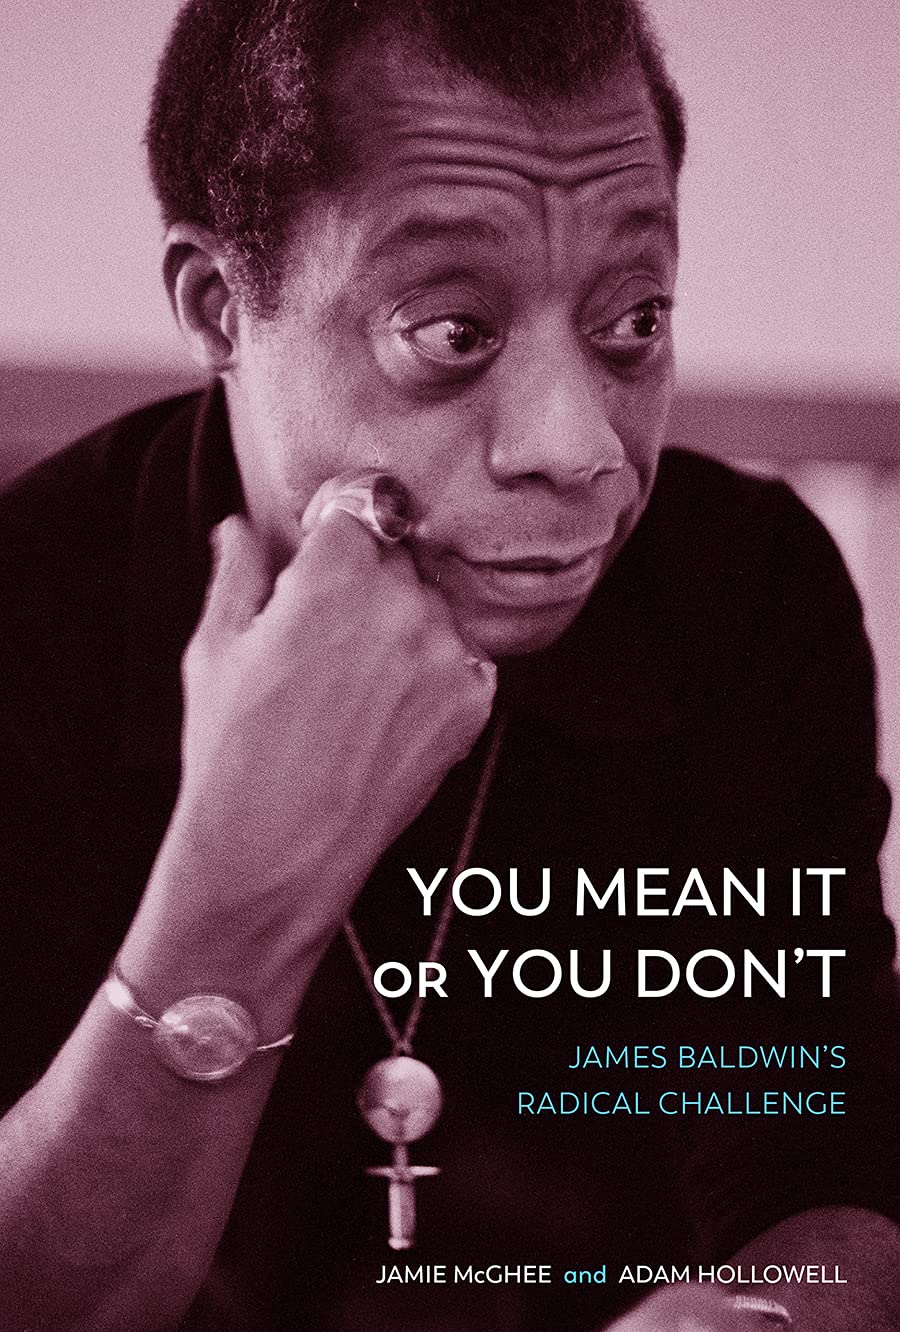 You Mean It or You Don't // James Baldwin's Radical Challenge